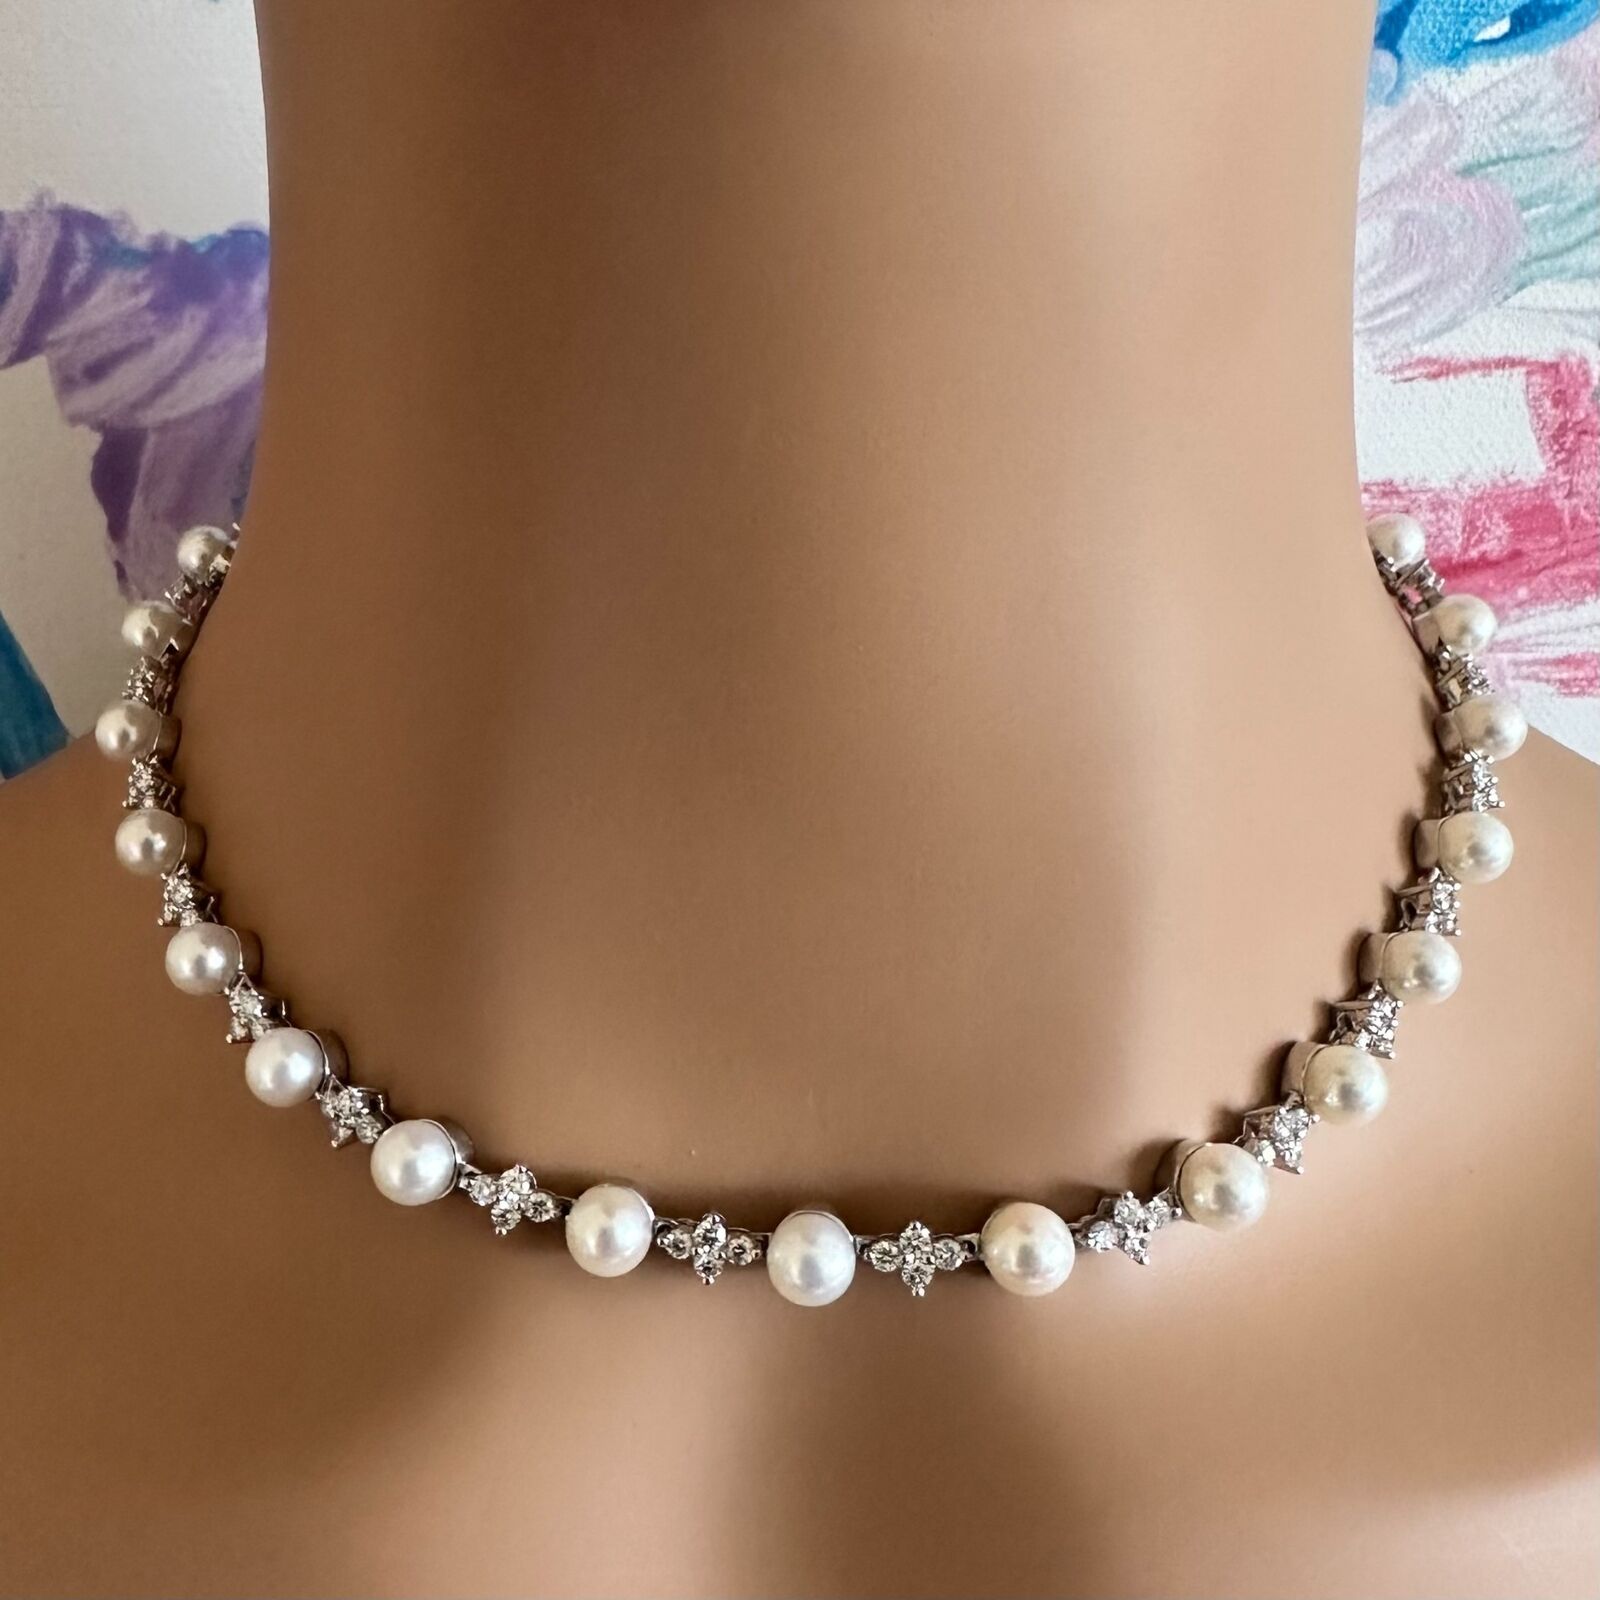 Knotted Pearl Lariat Silver Necklace, Freshwater Pearls Luxe 925 Sterl –  KesleyBoutique